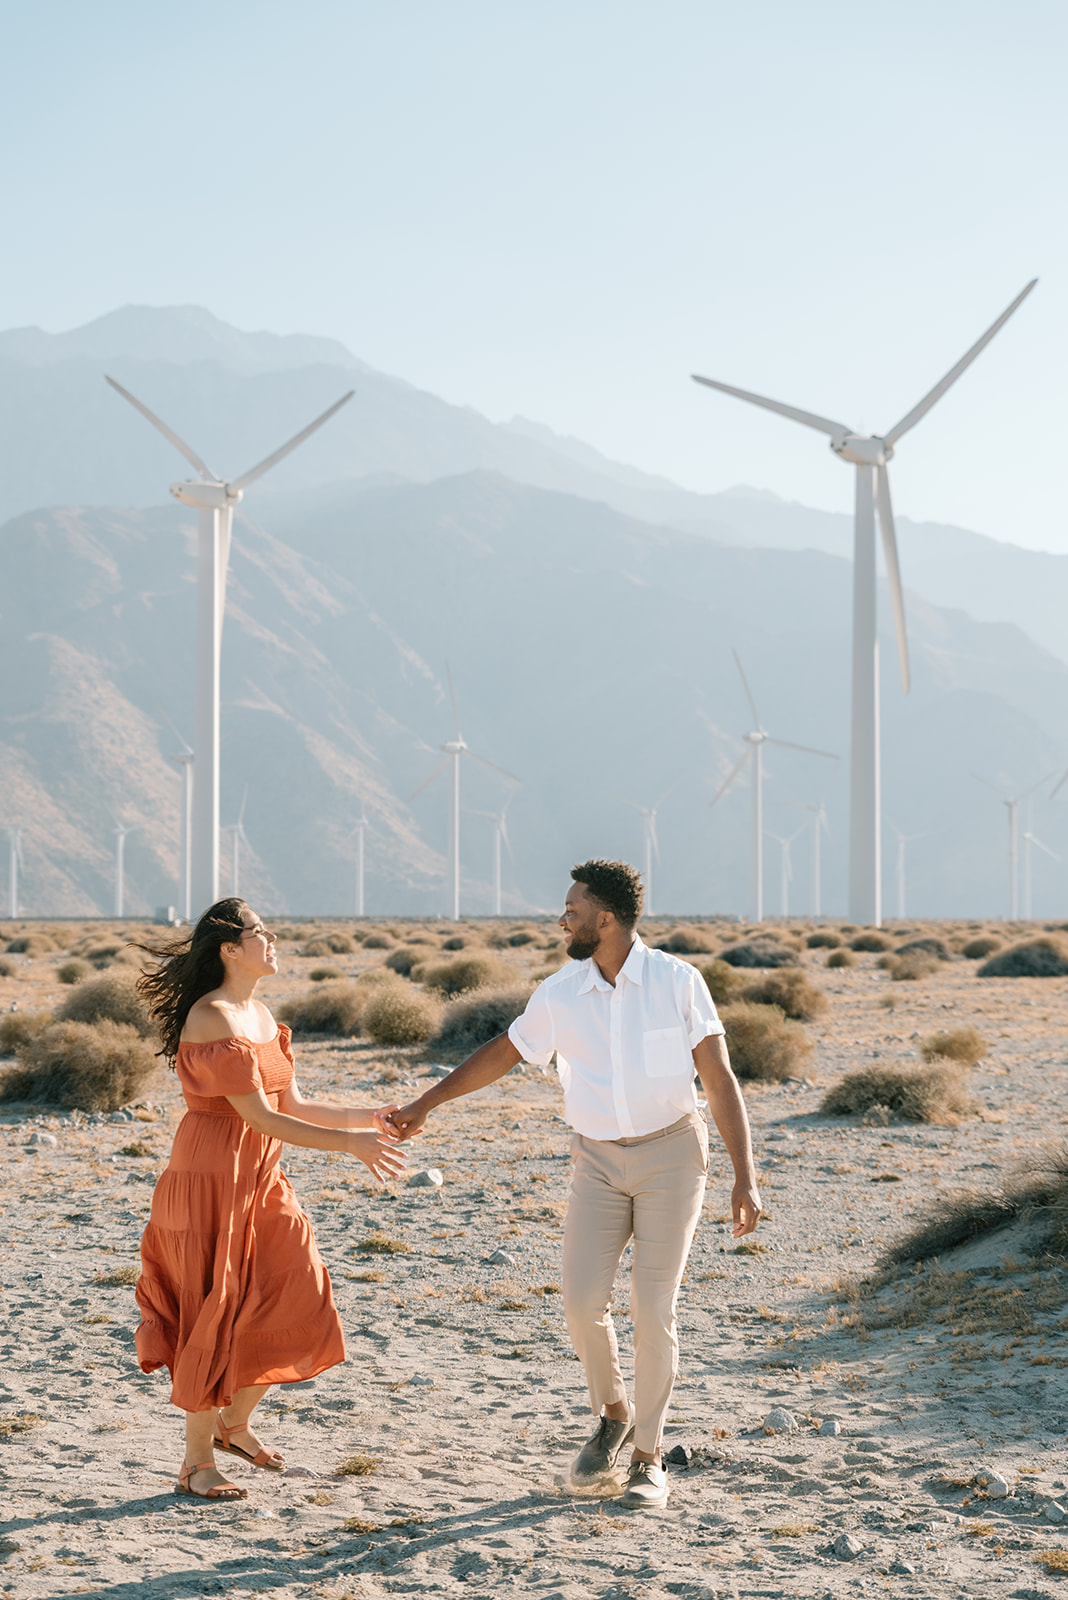 Wind turbines blow in the wind behind engaged couple